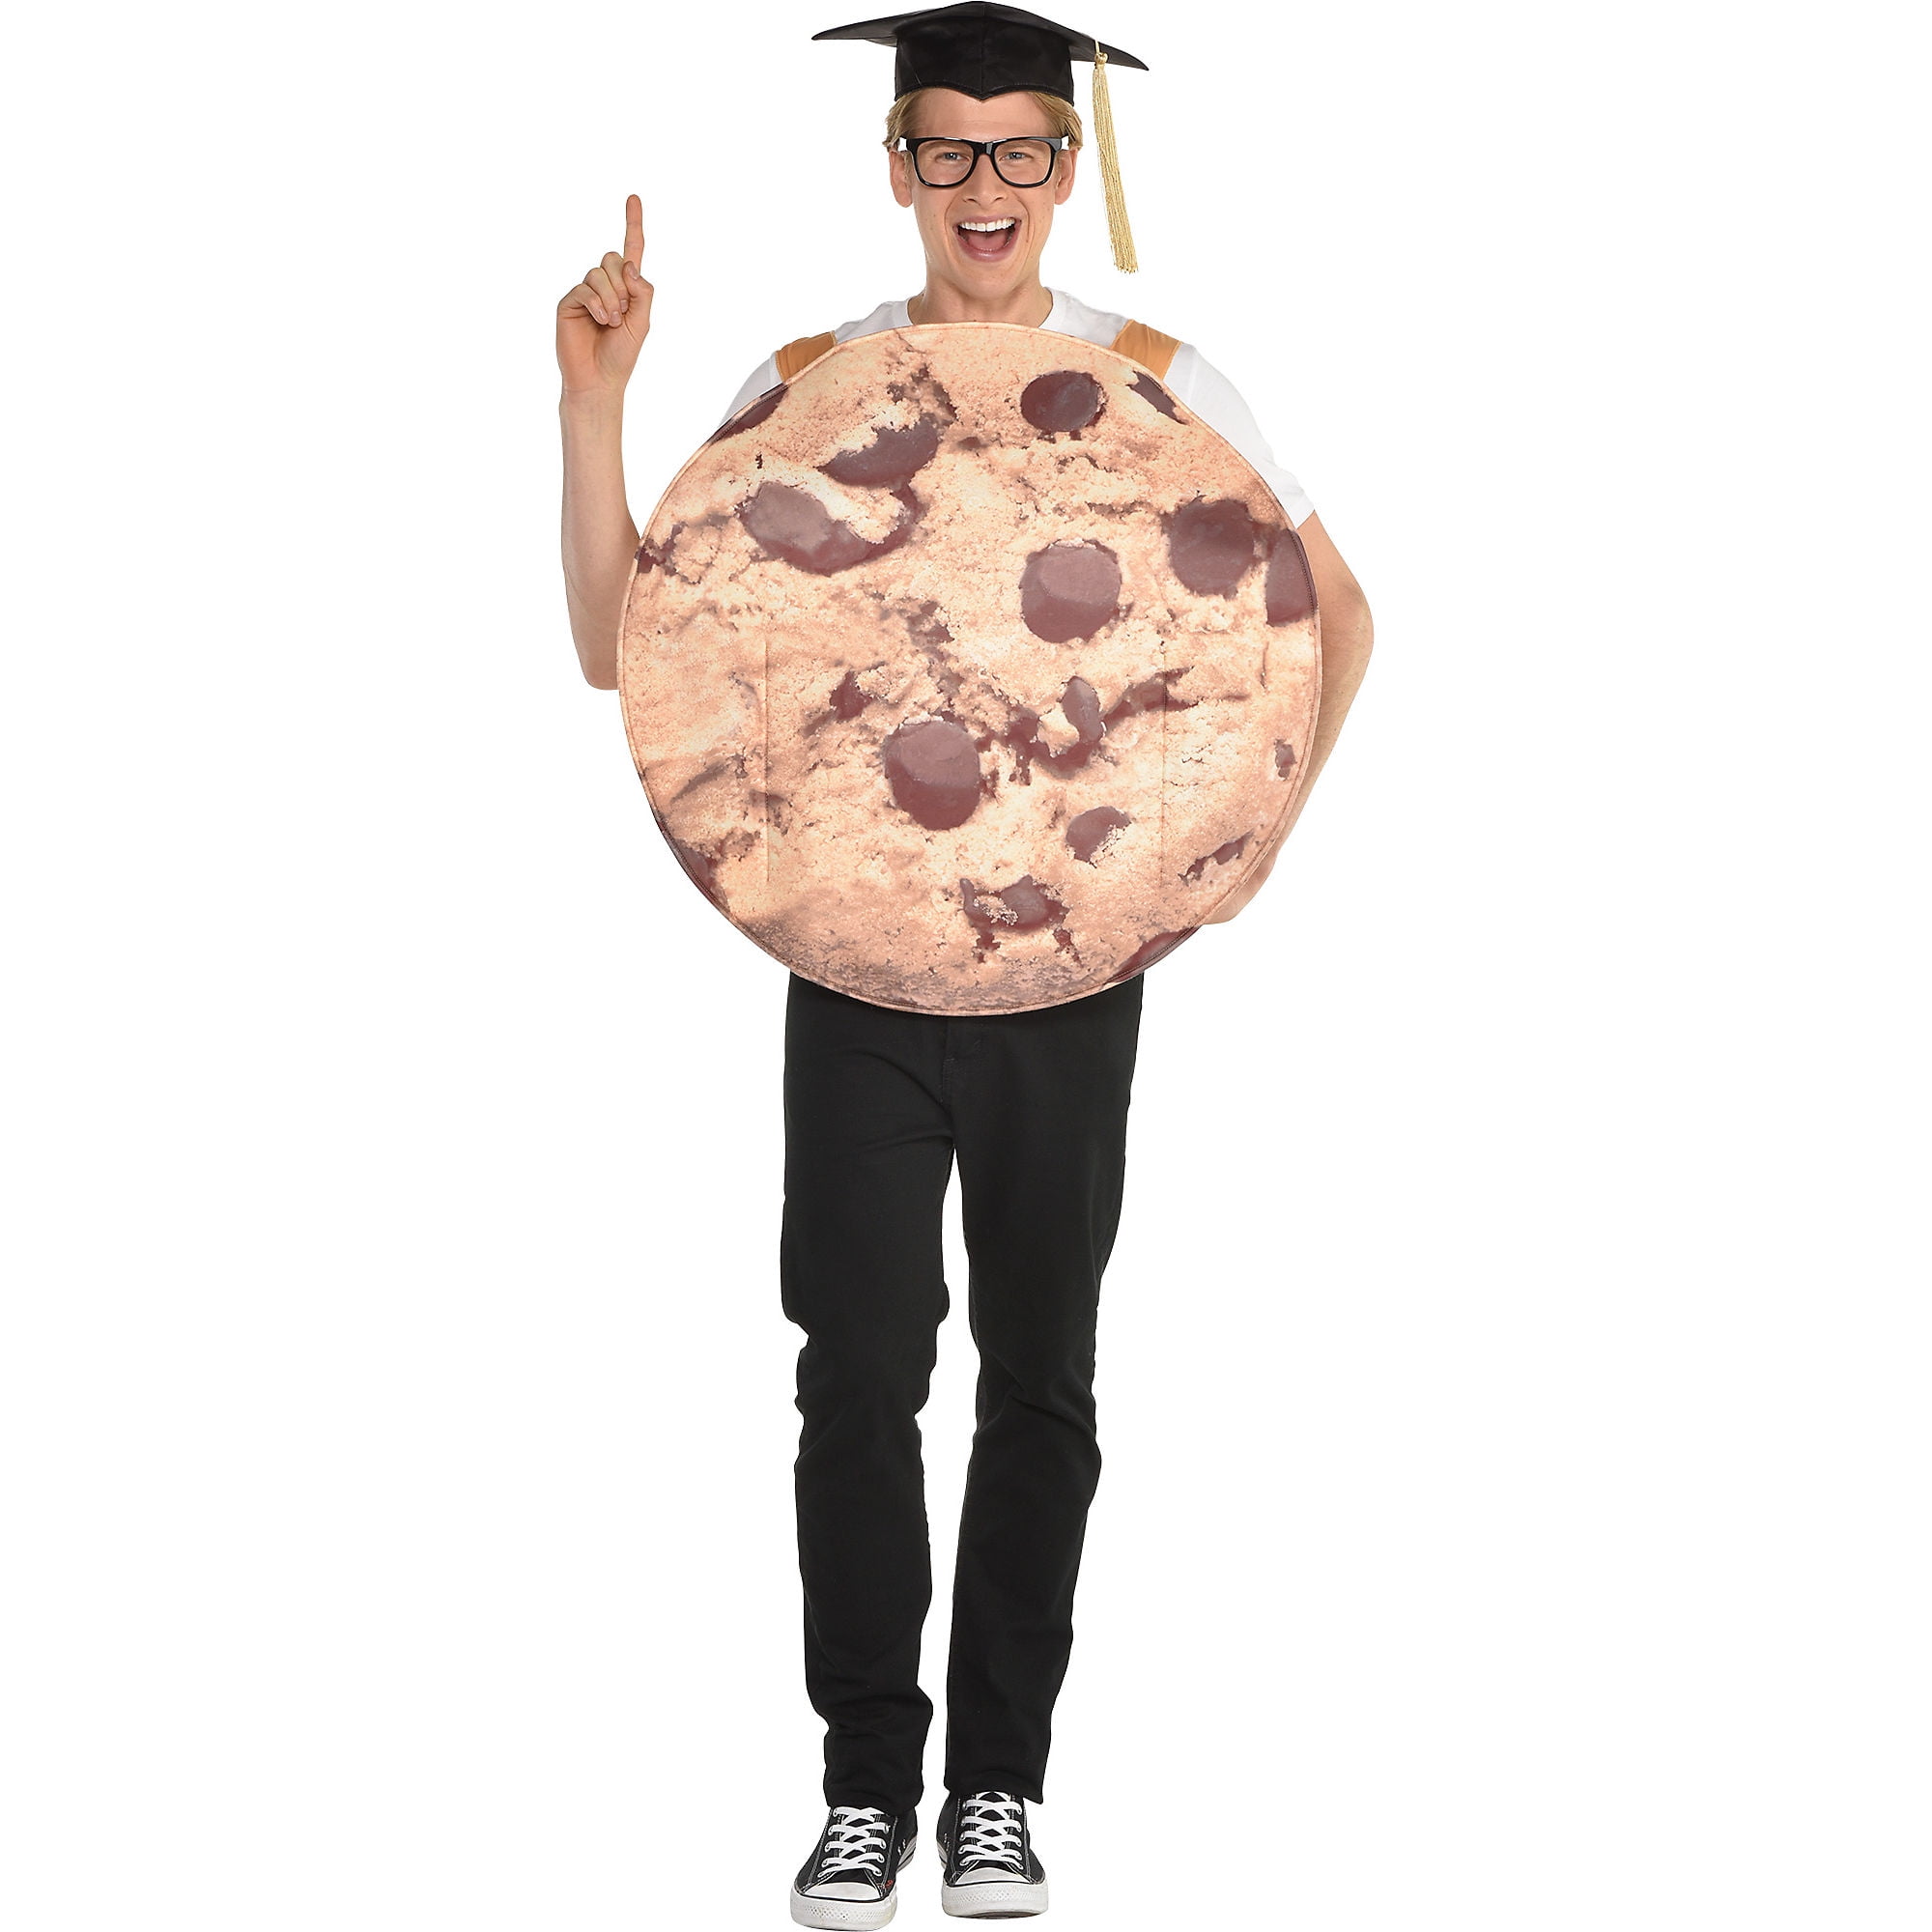 Smart Cookie Halloween Costume Accessory Kit for Size, 4 - Walmart.com